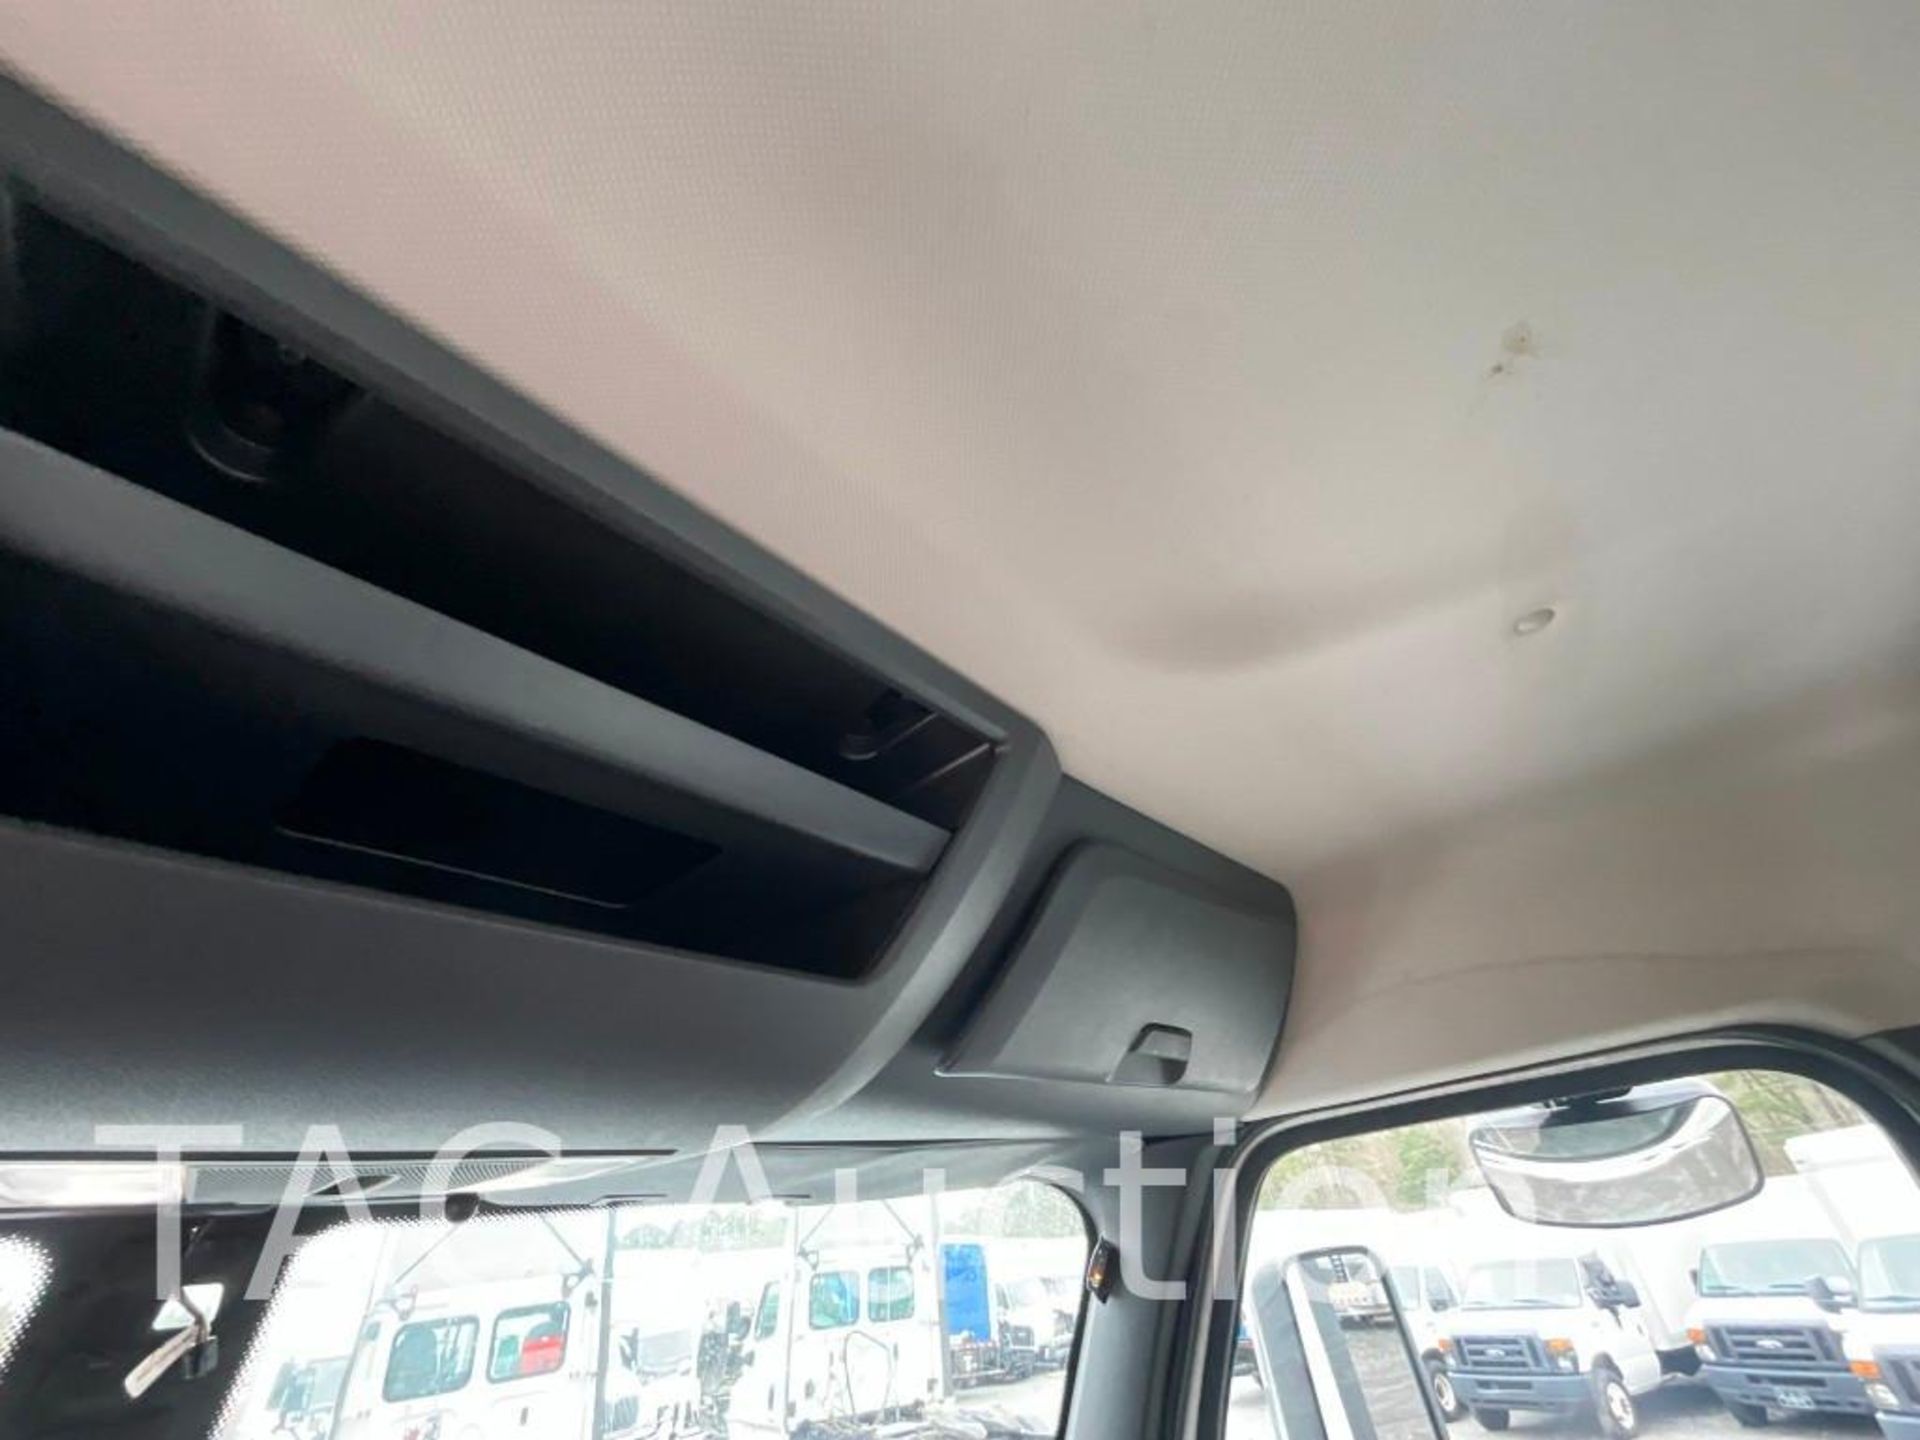 2019 Freightliner Cascadia Day Cab - Image 23 of 54